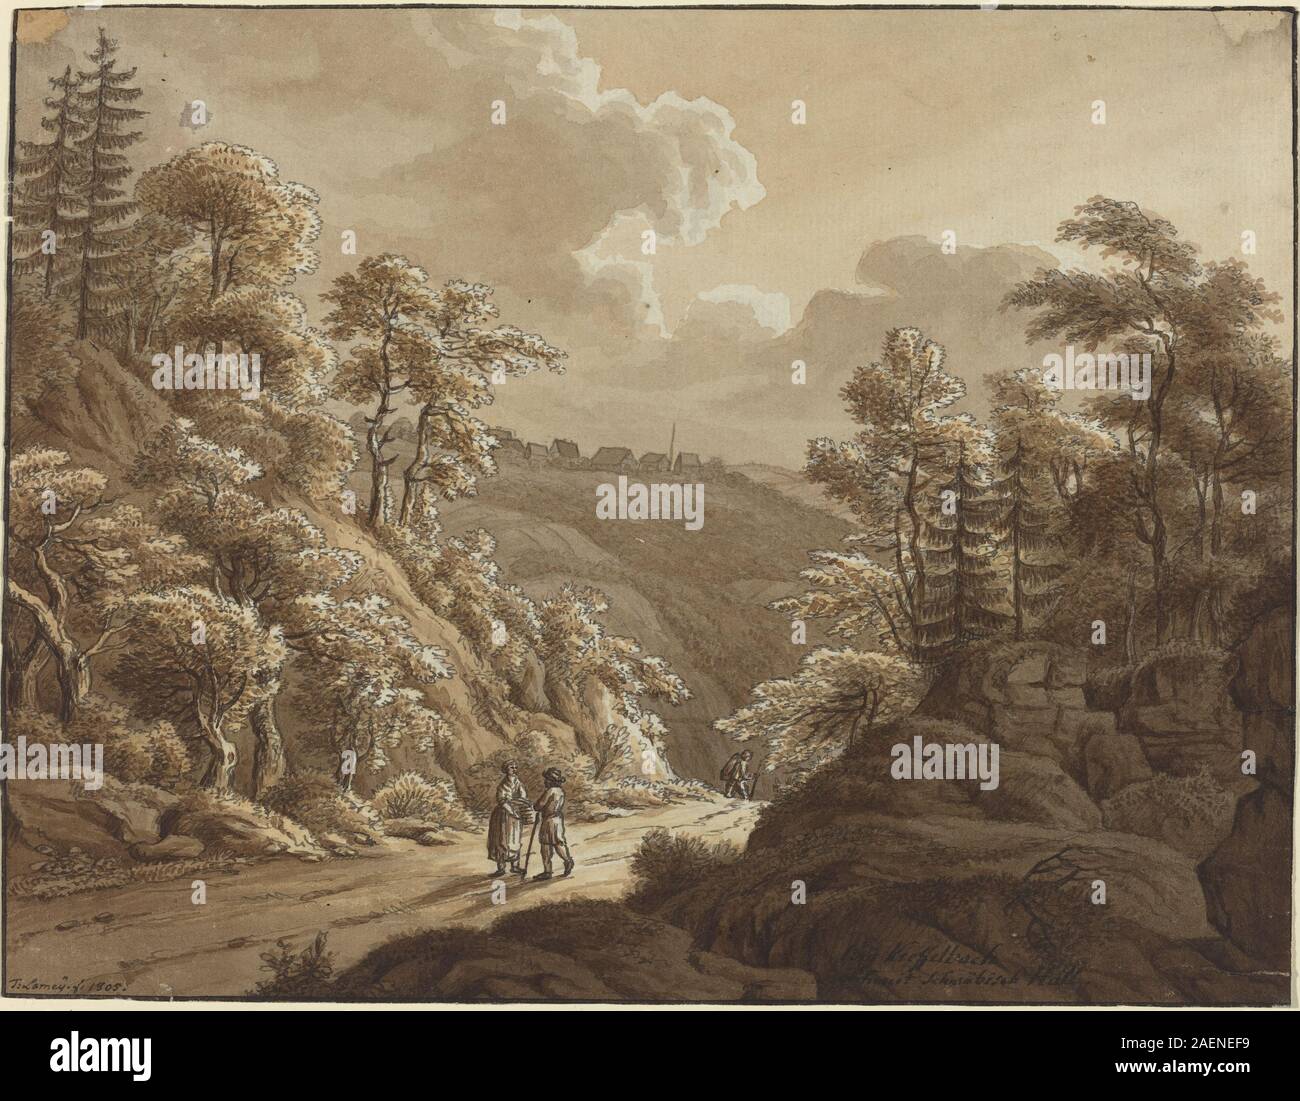 T Lamey, Road through the Woods near Kresselbach, 1805, Road through the Woods near Kresselbach; 1805 date Stock Photo